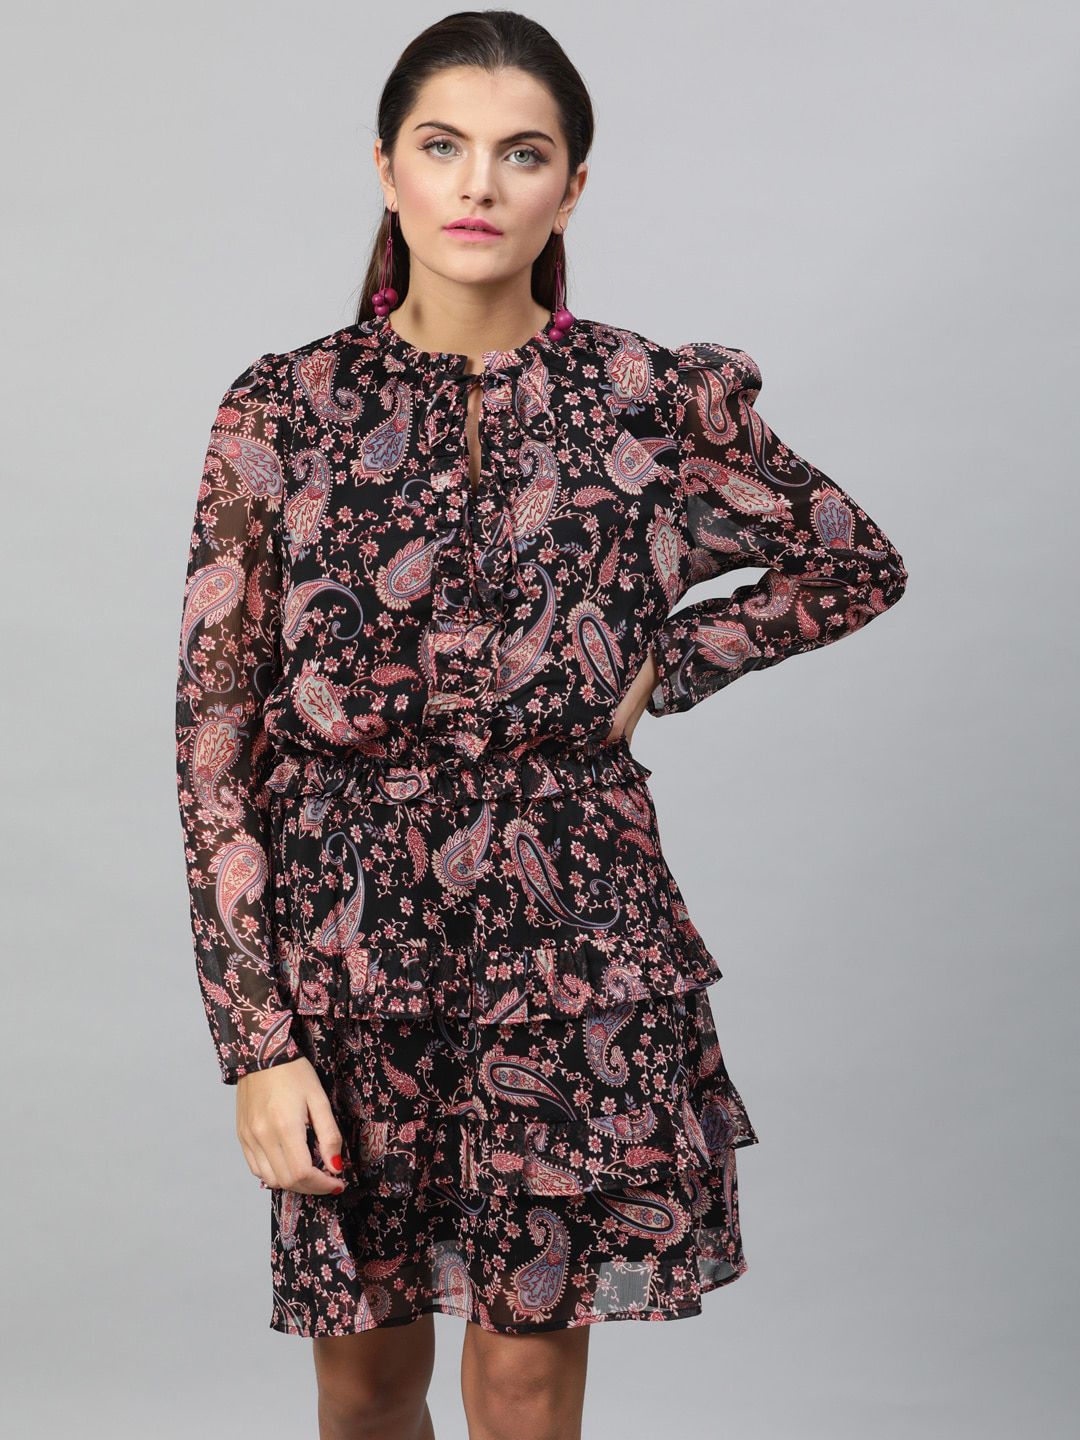 STREET 9 Women Multicoloured Printed Fit and Flare Dress Price in India